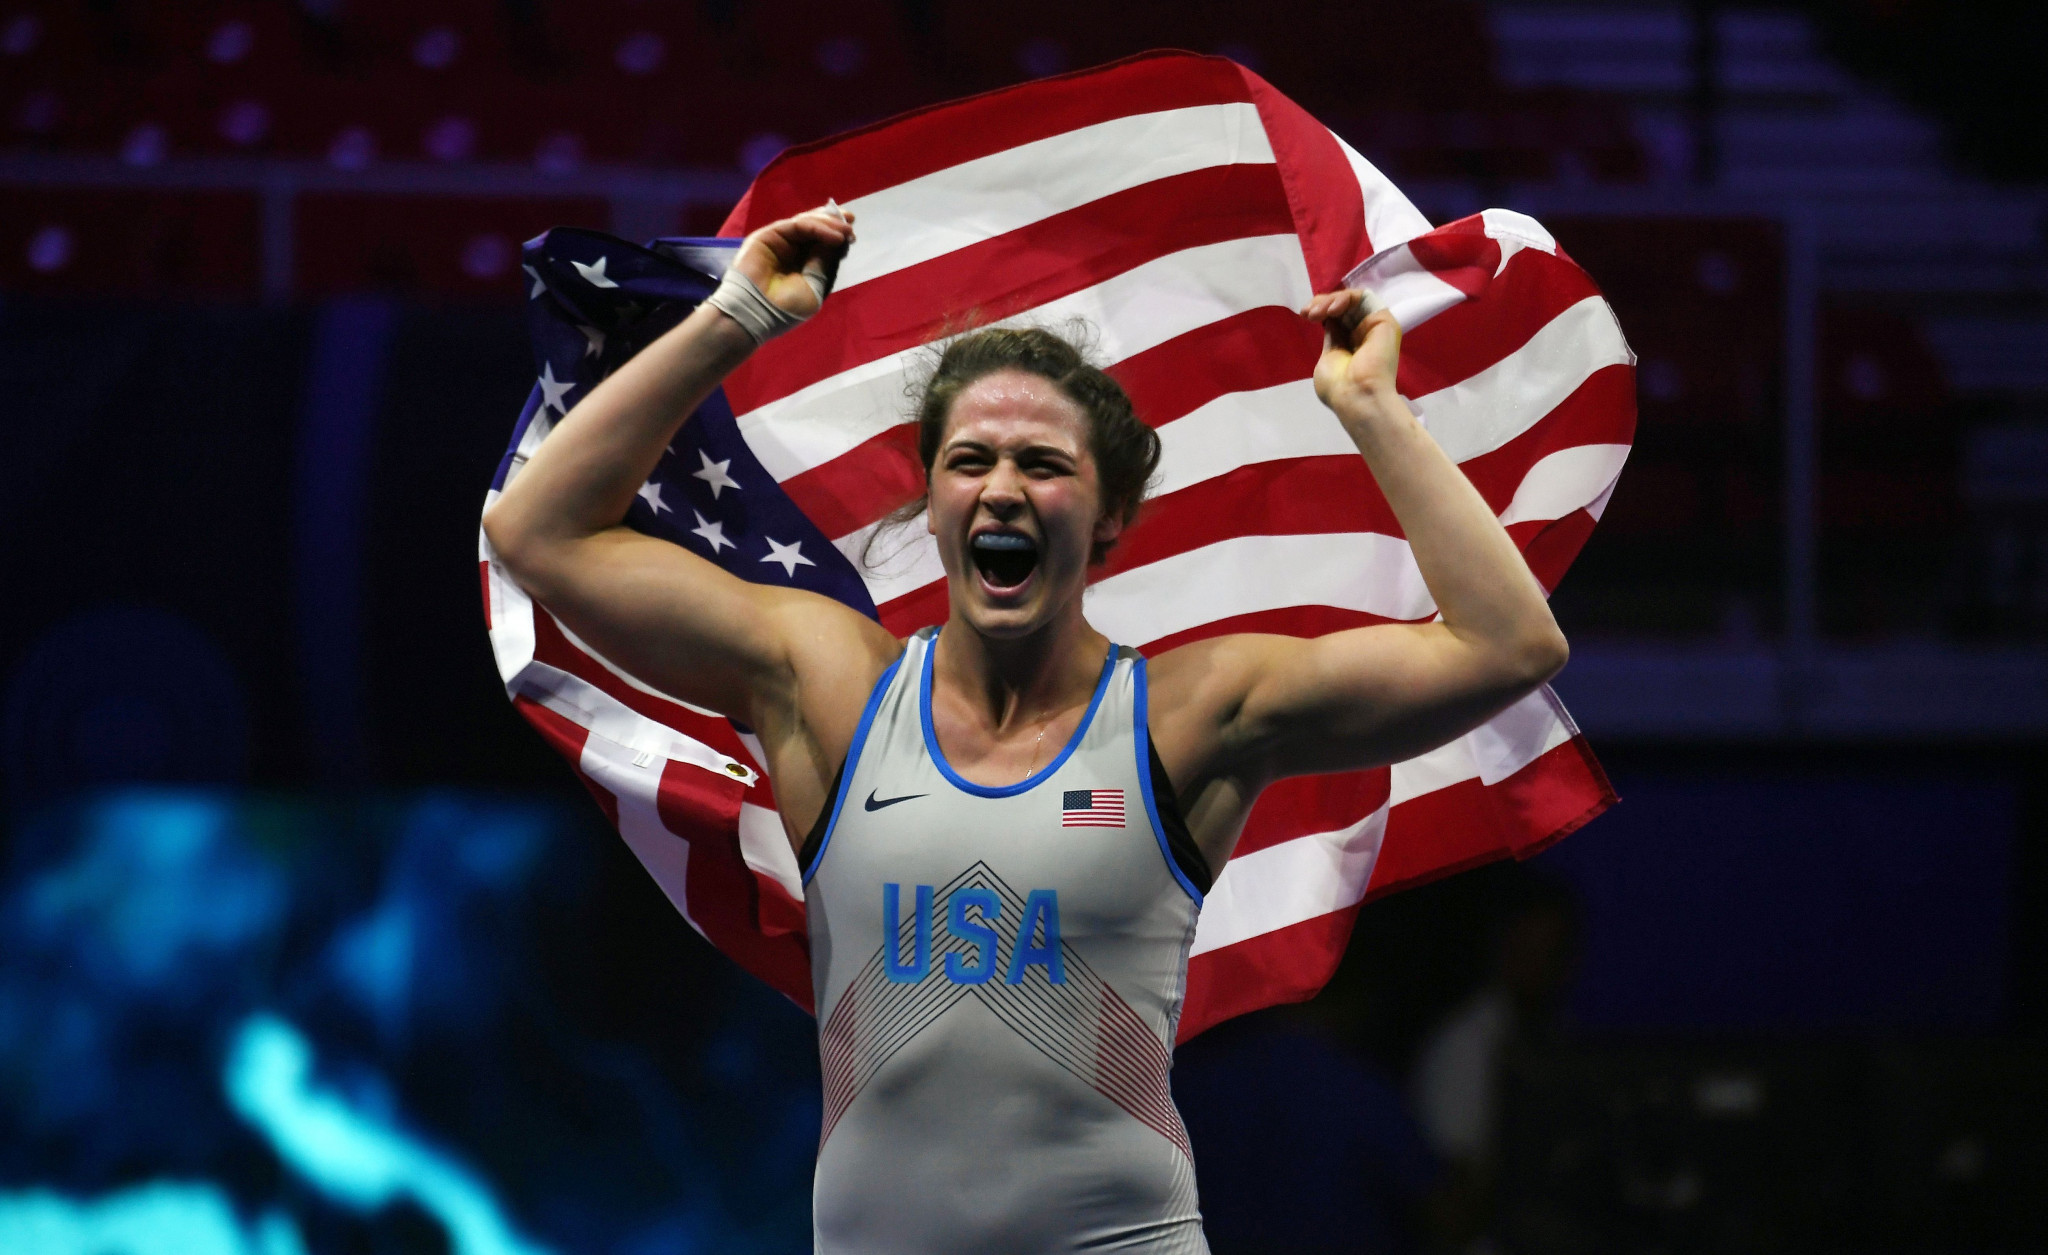 Gray edges Minagawa to earn fifth women's title at World Wrestling Championships 